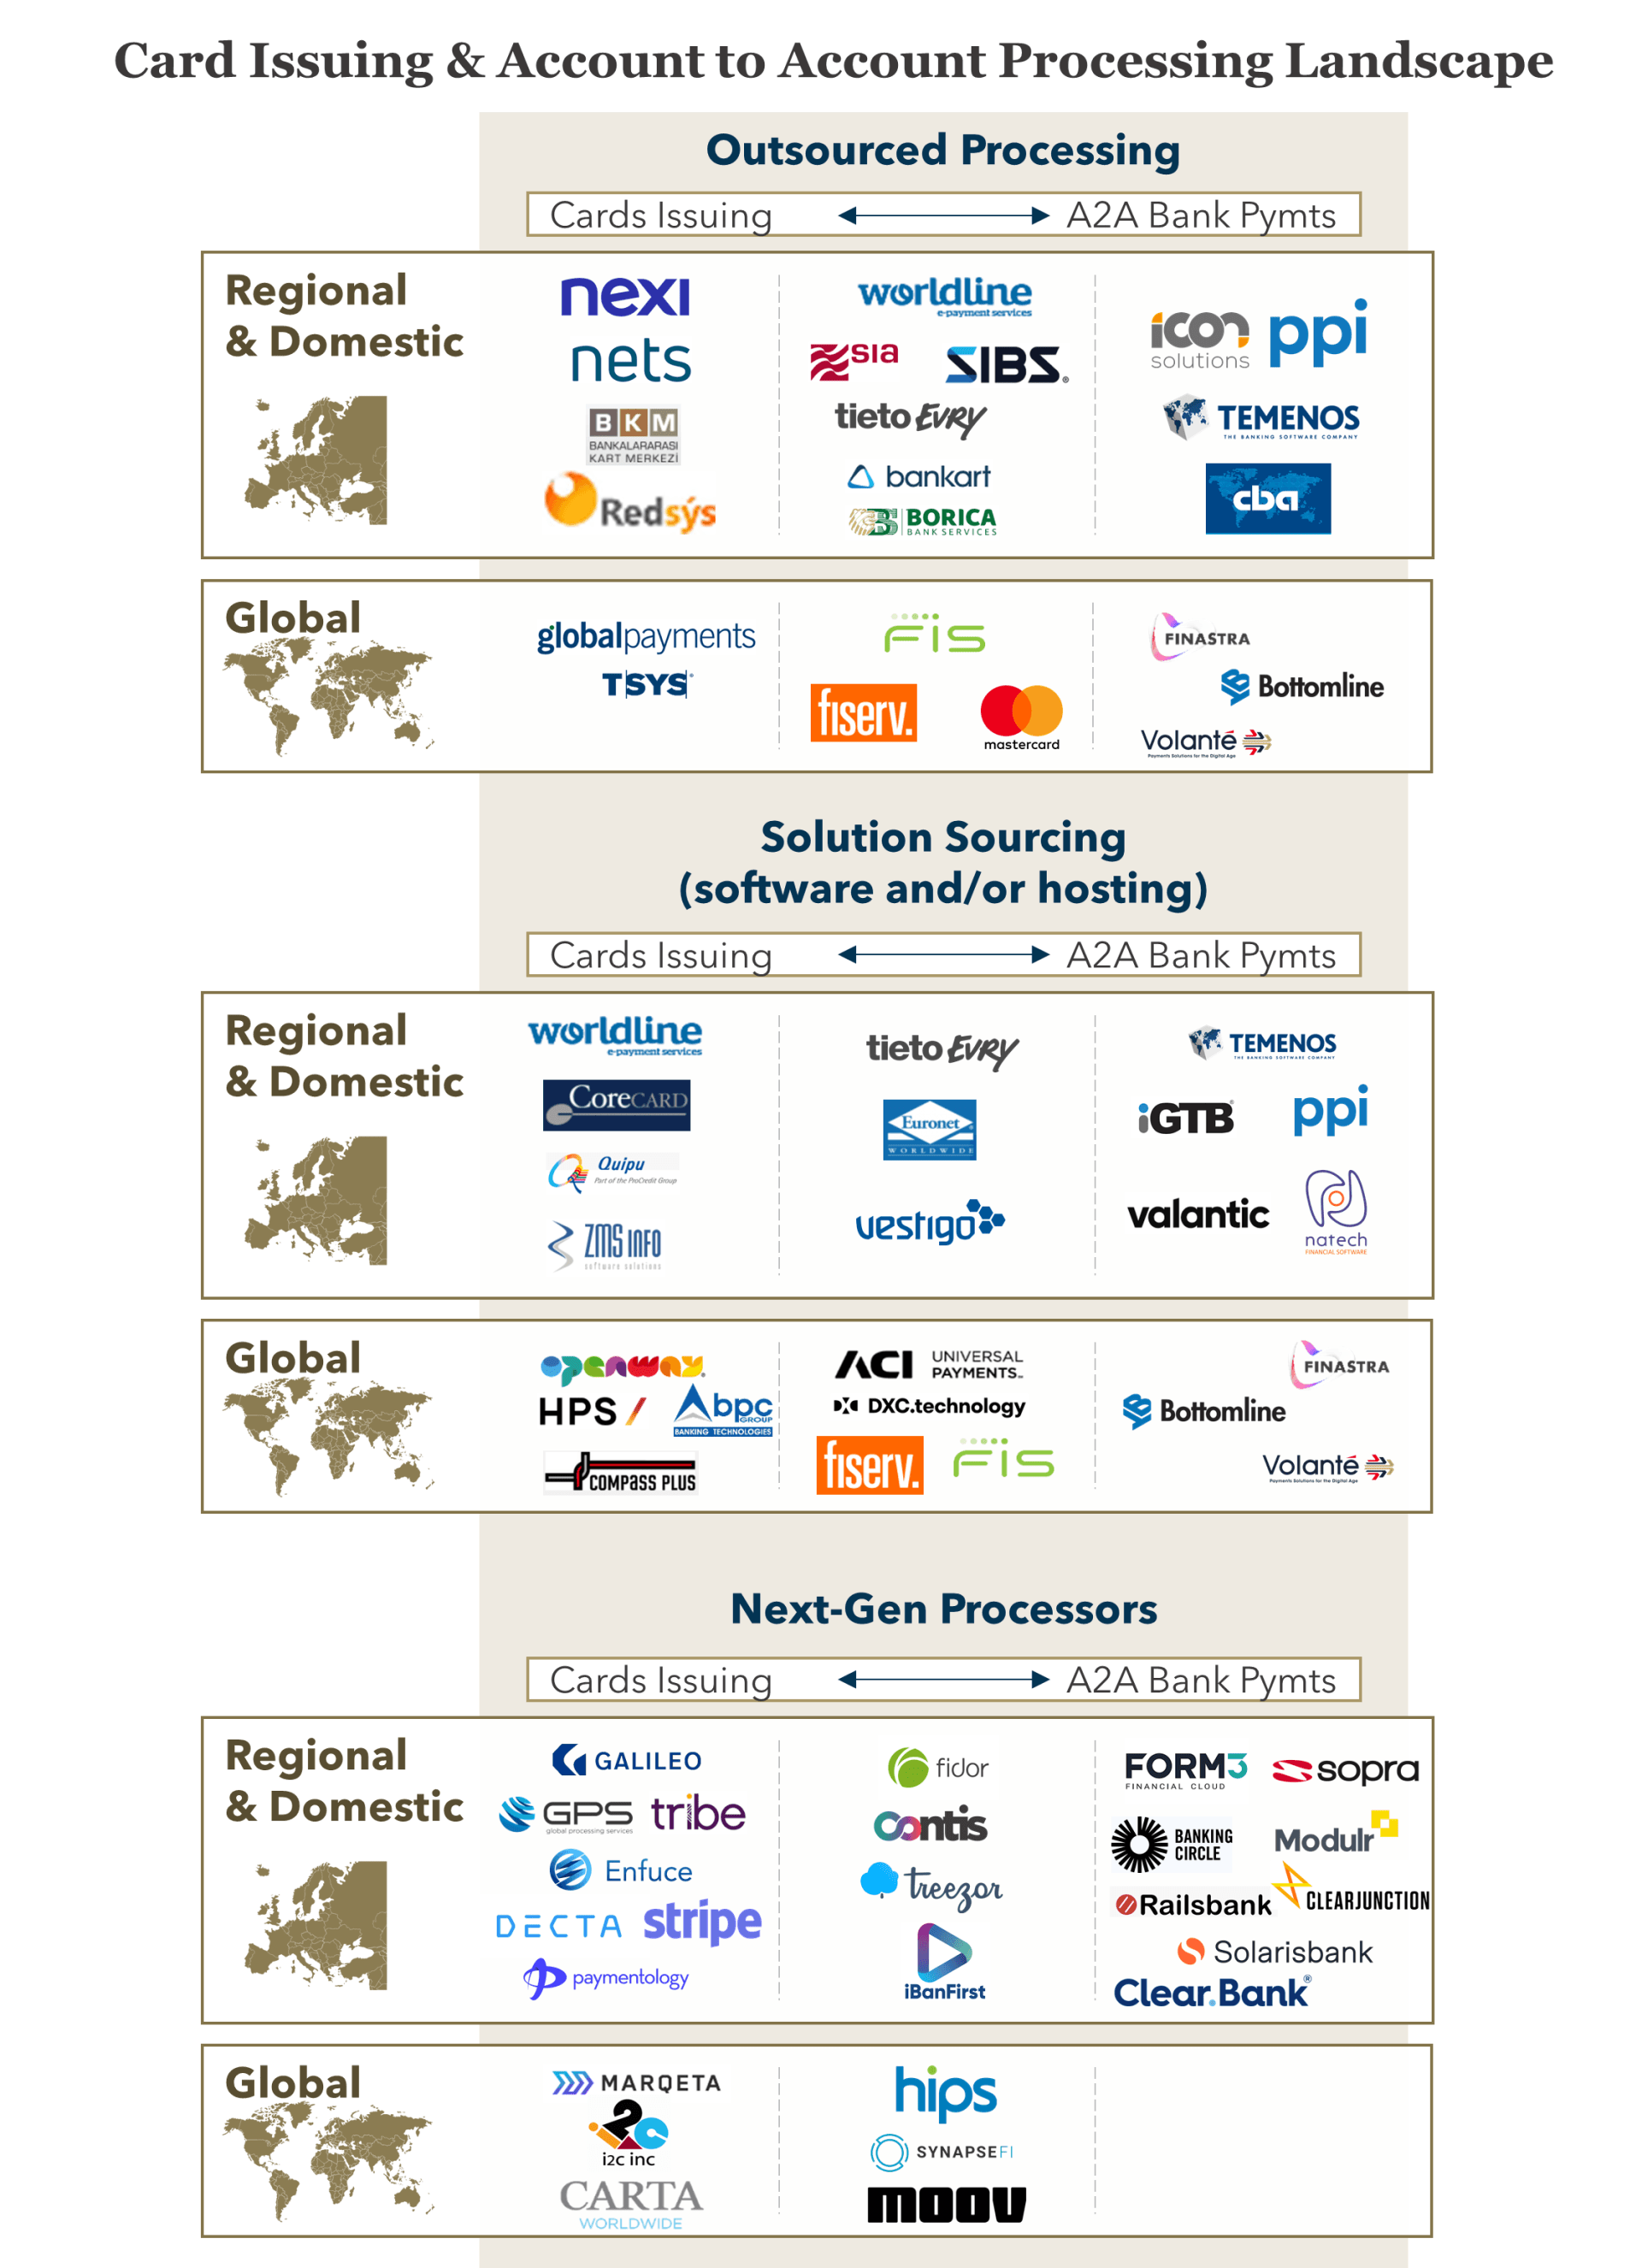  FIGURE 1: Card Issuing & Account to Account Bank Payments Processing Landscape